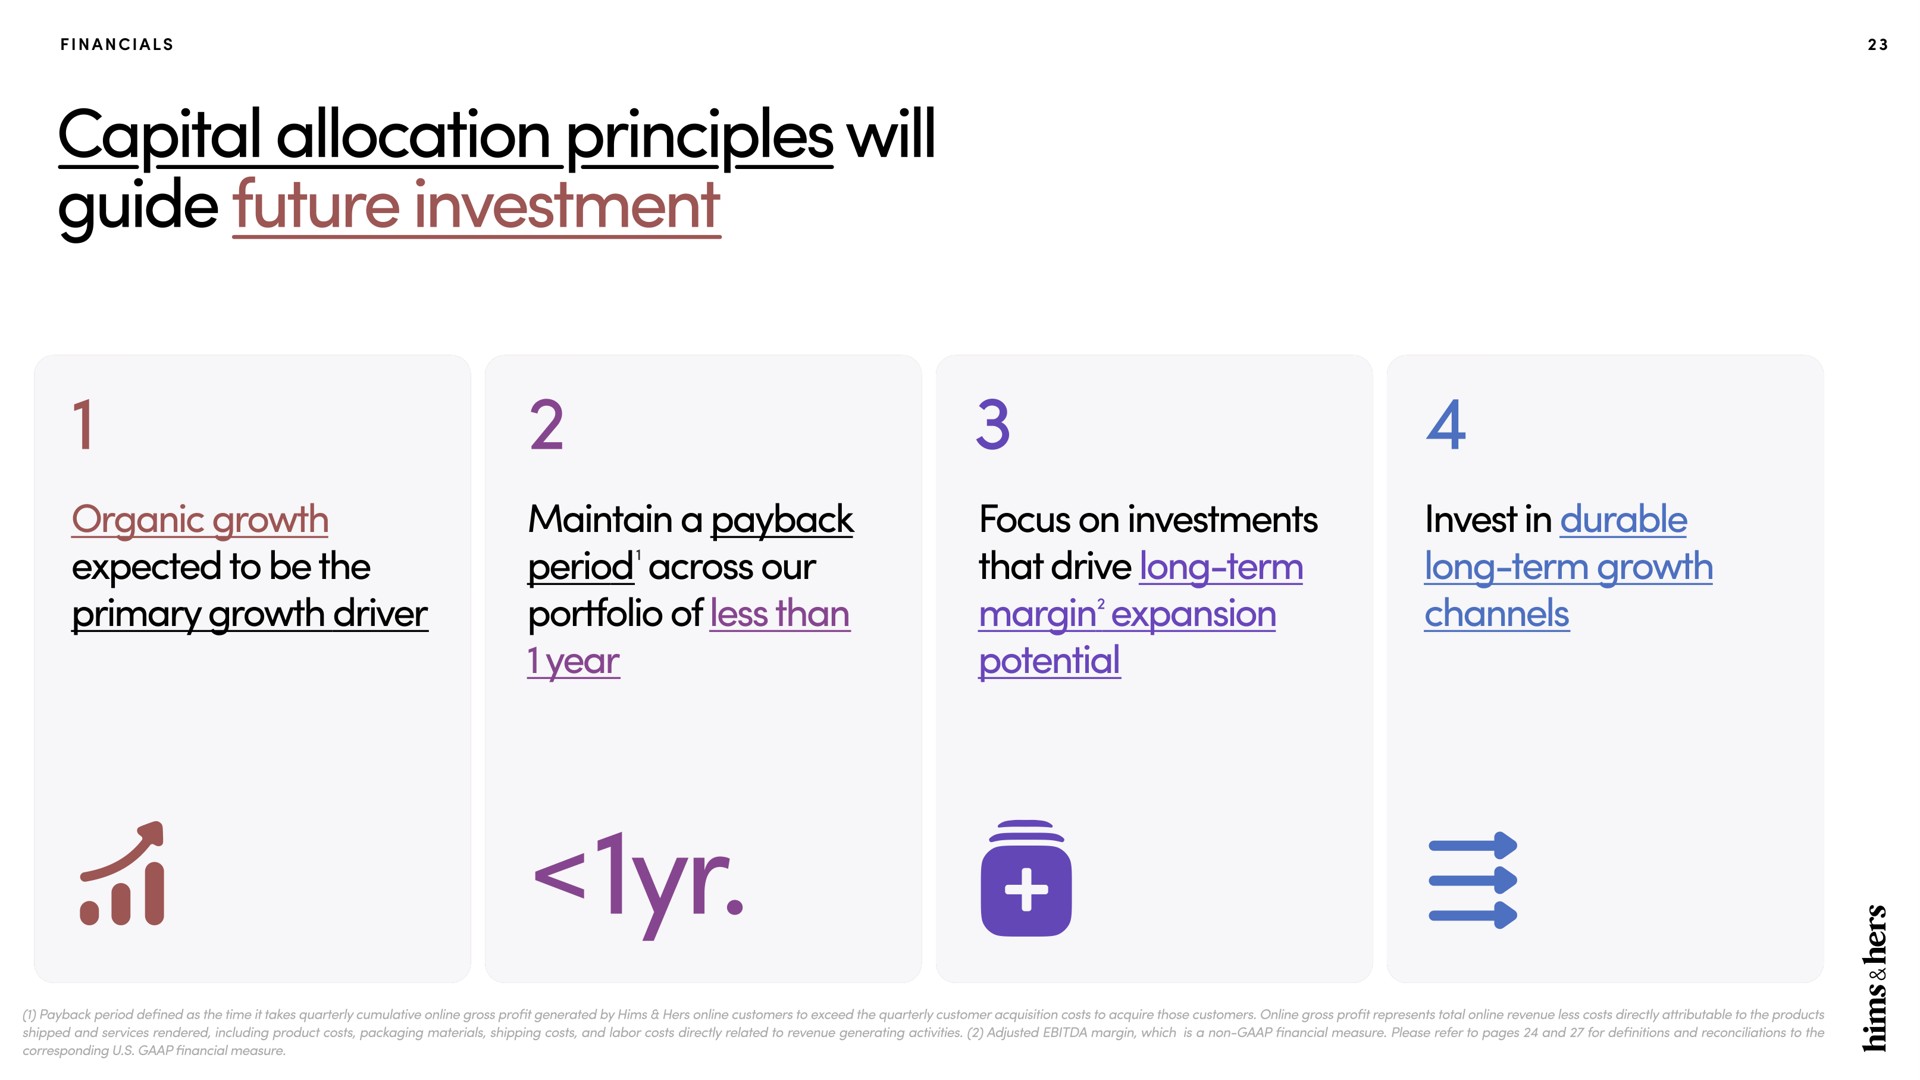 capital allocation principles will guide future investment at | Hims & Hers